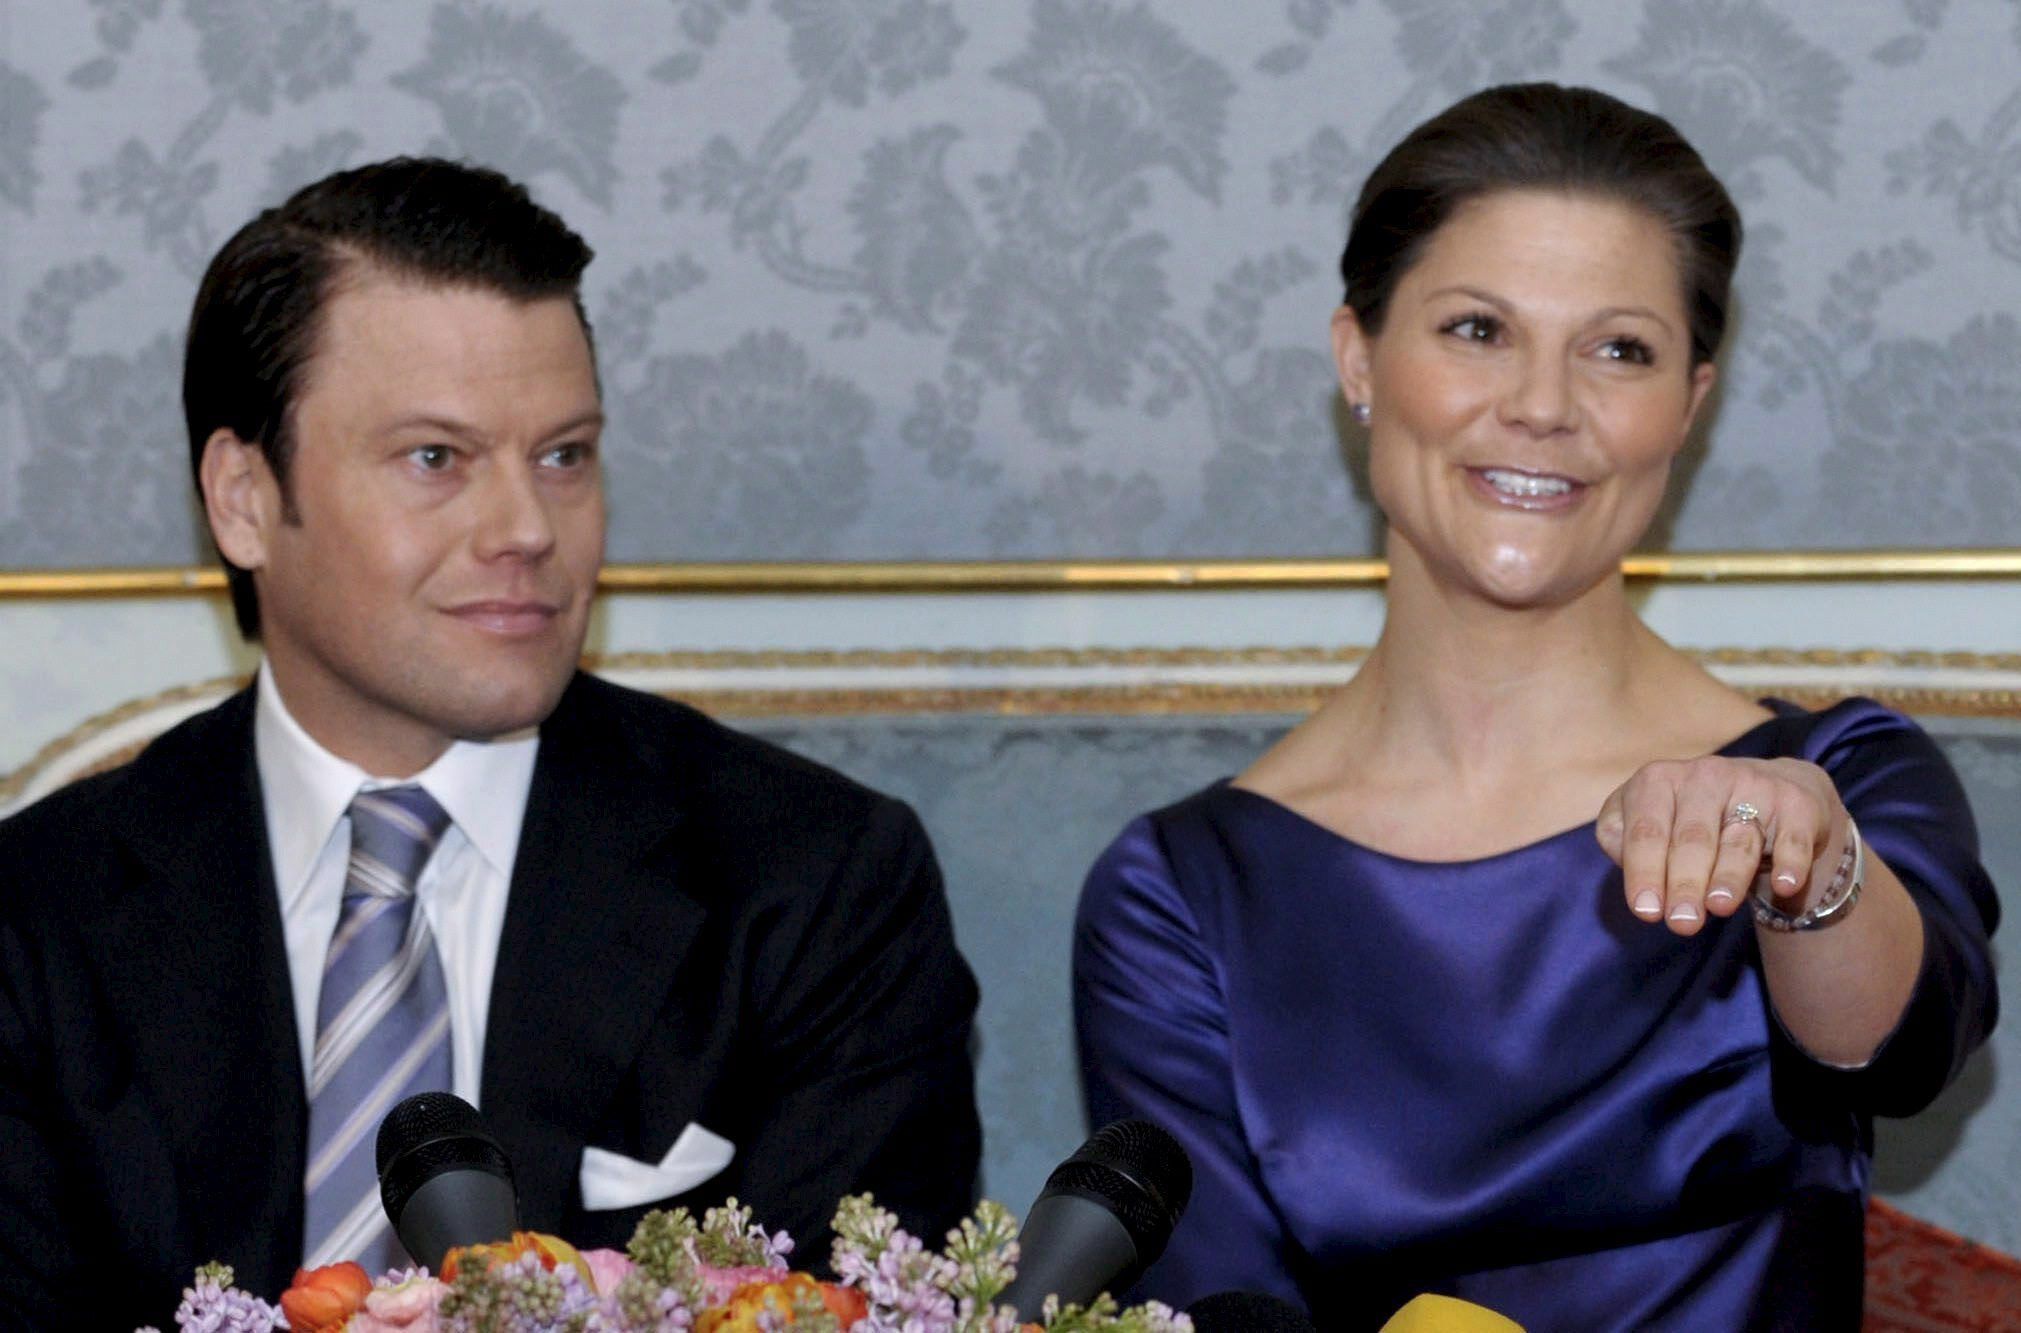 Sweden's Crown Princess Victoria (R) shows off her ring as she and her fiance Daniel Westling (L) meet the press at the Royal Palace in Stockholm, Sweden, 24 February 2009, announcing their engagement. 